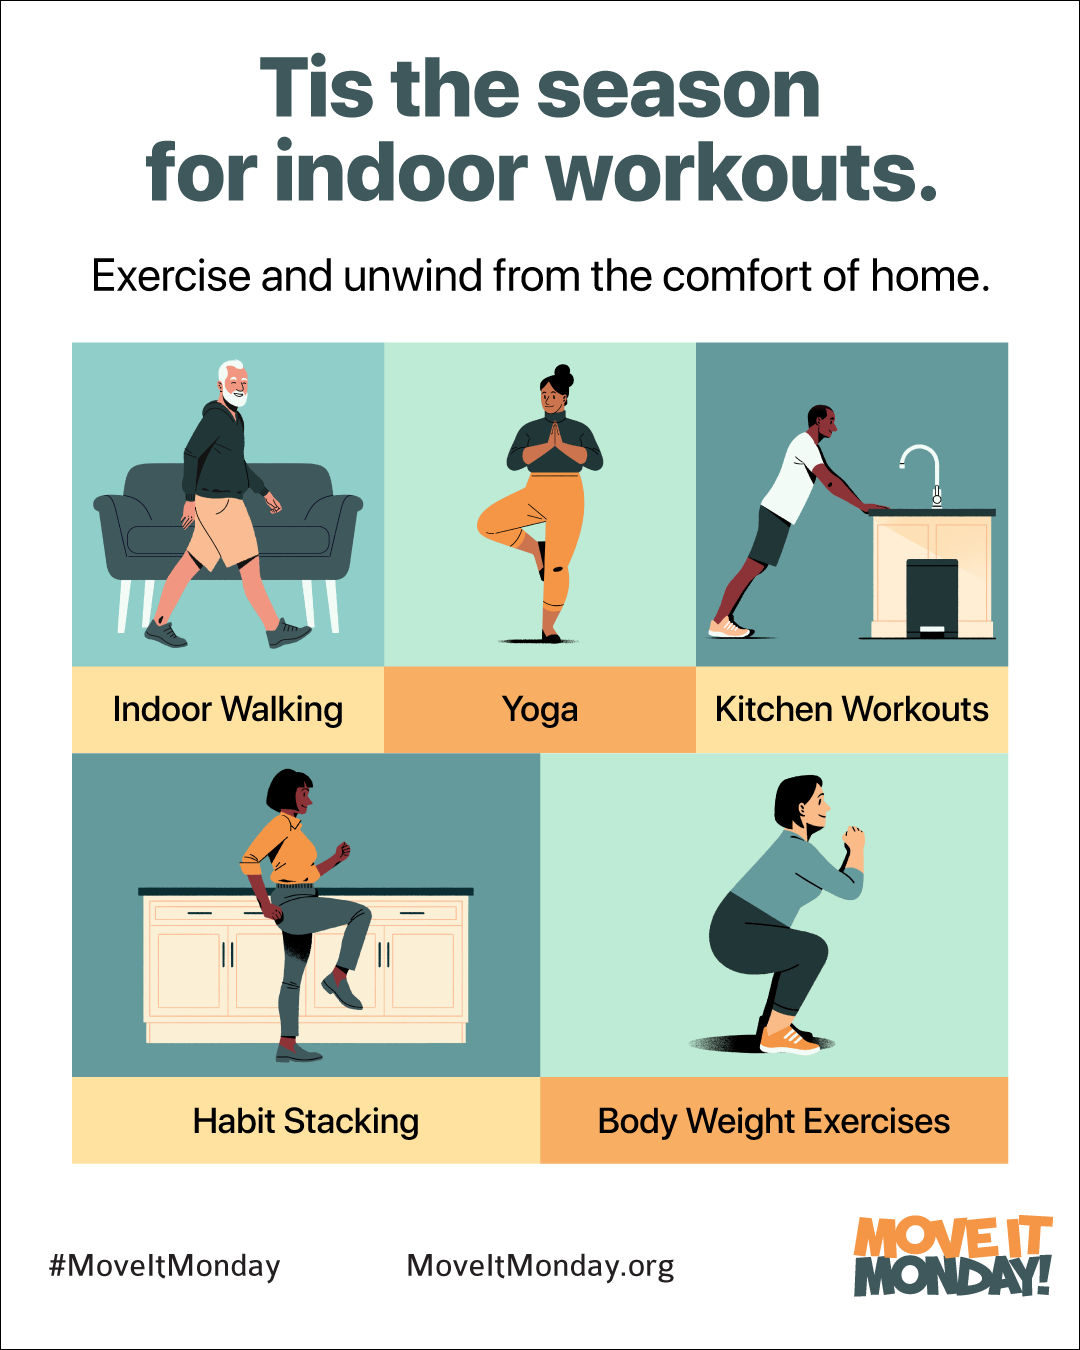 Jump Start Your Day with 3 Quick At-Home Workouts